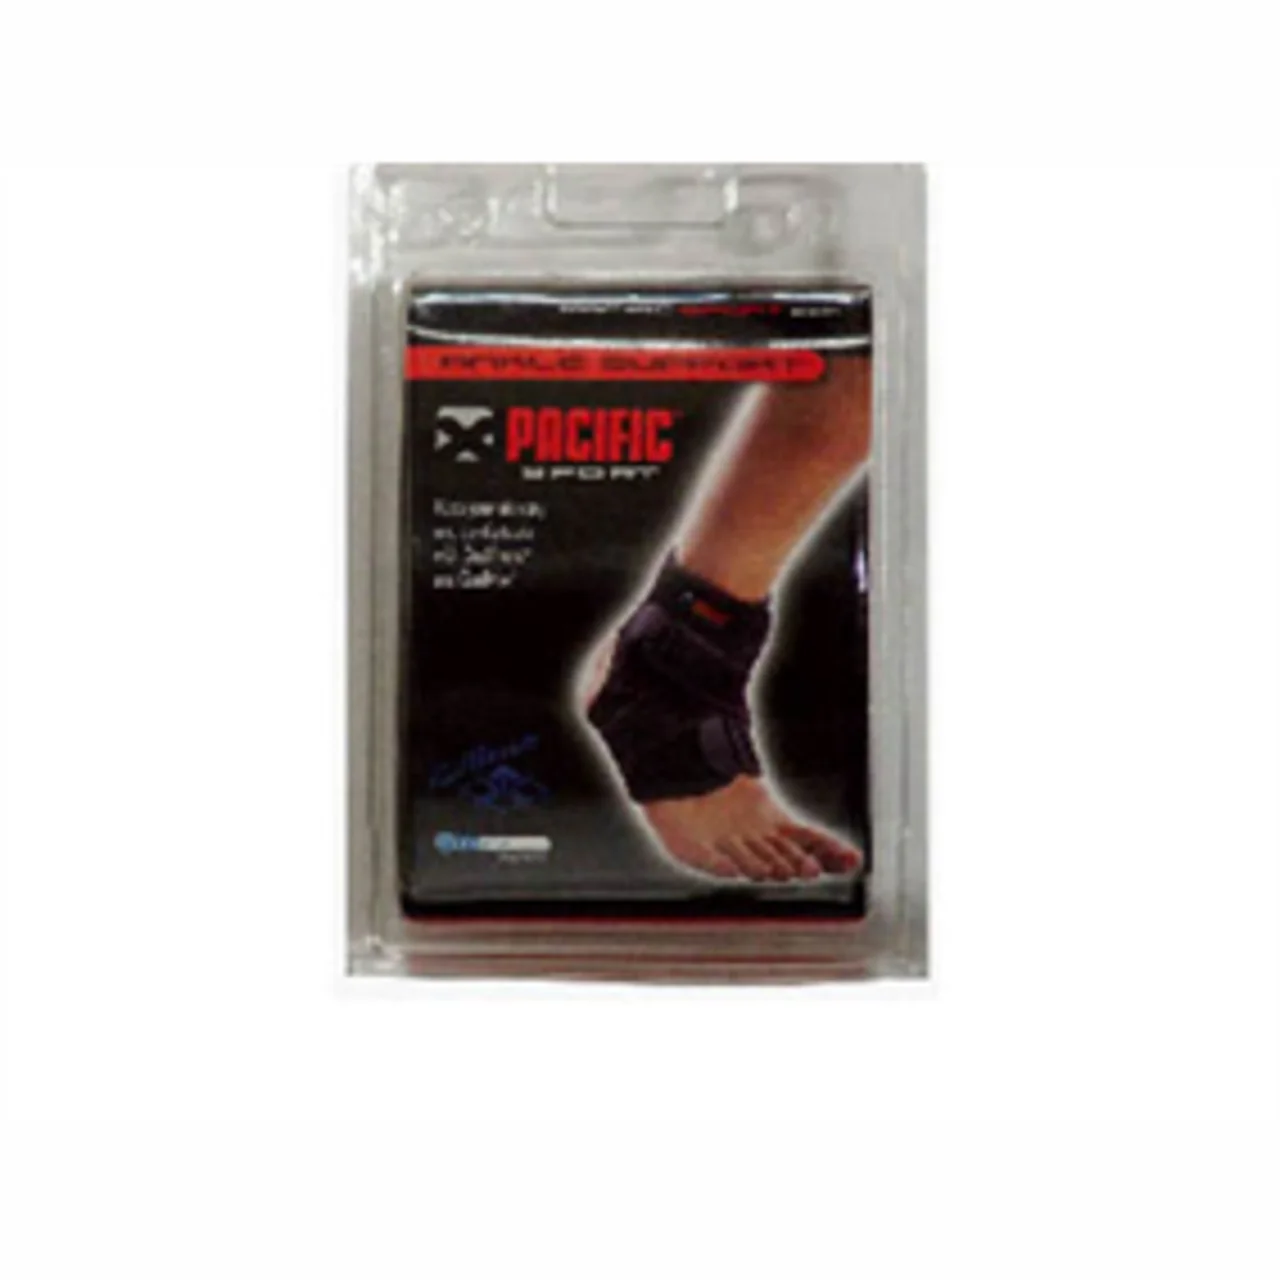 Pacific Ankle Support